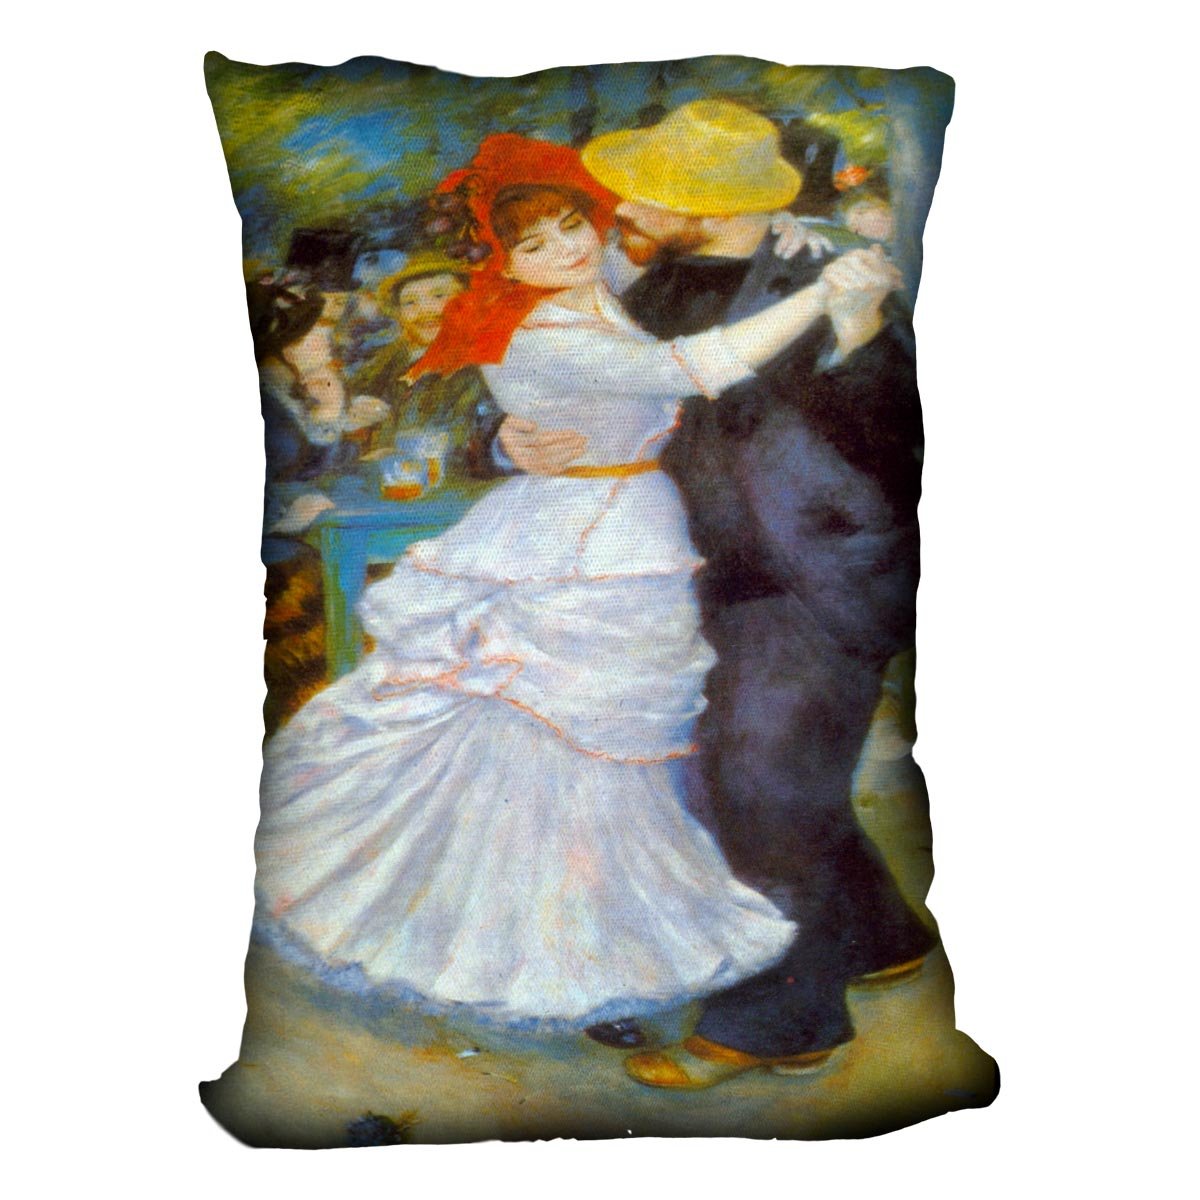 Dance at Bougival by Renoir Throw Pillow